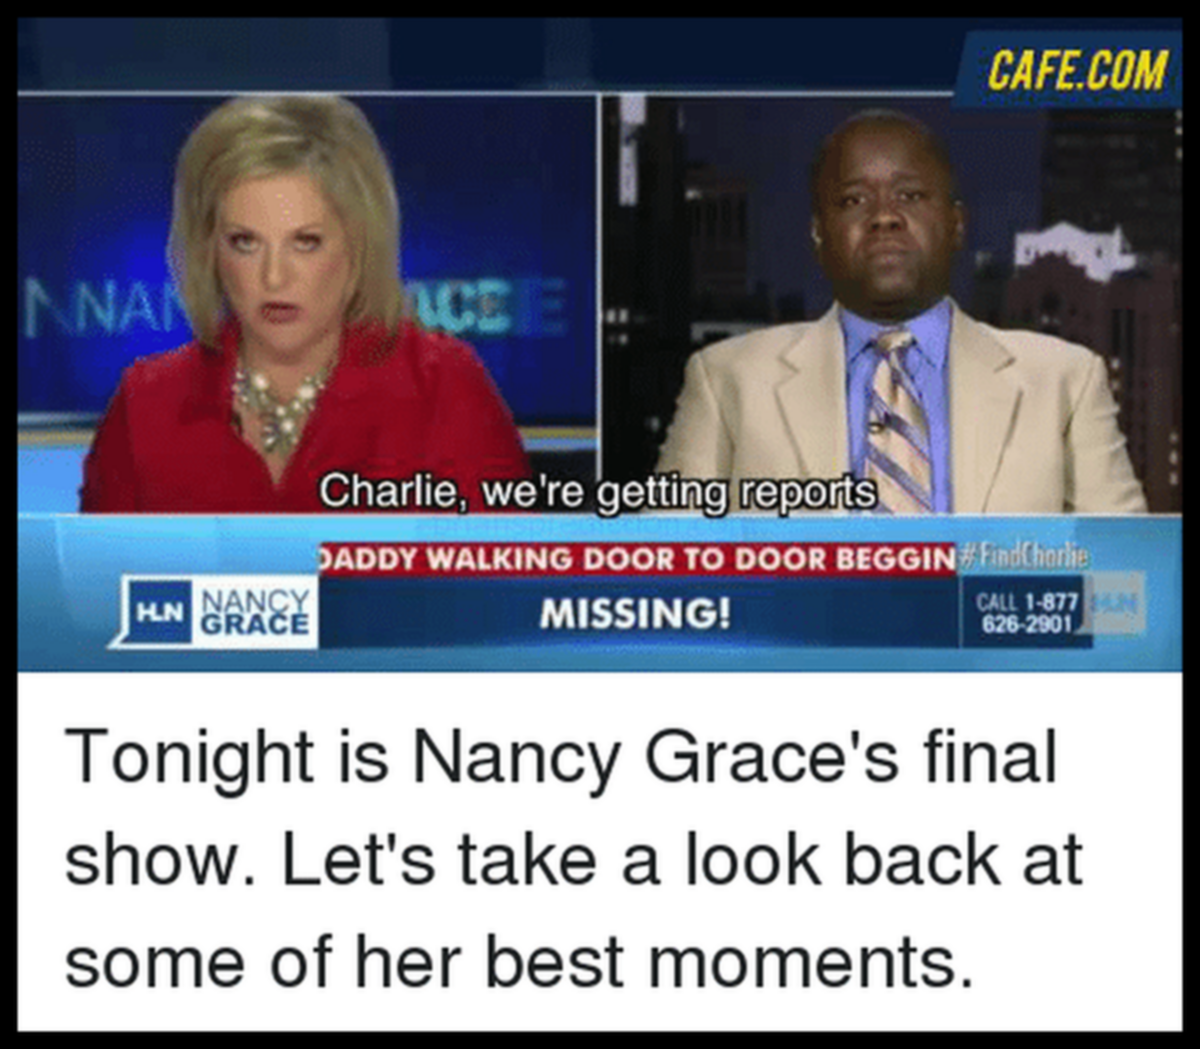 Nancy Grace Missing Person Cases Psychic Detective Brian Ladd Update On Case  Cafe-com-ace-charlie-were-getting-reports-daddy-walking-door-11029147 Found
Nancy Grace Missing Person Cases Psychic Detective Brian Ladd Update On Case  Cafe-com-ace-charlie-were-getting-reports-daddy-walking-door-11029147 Found
